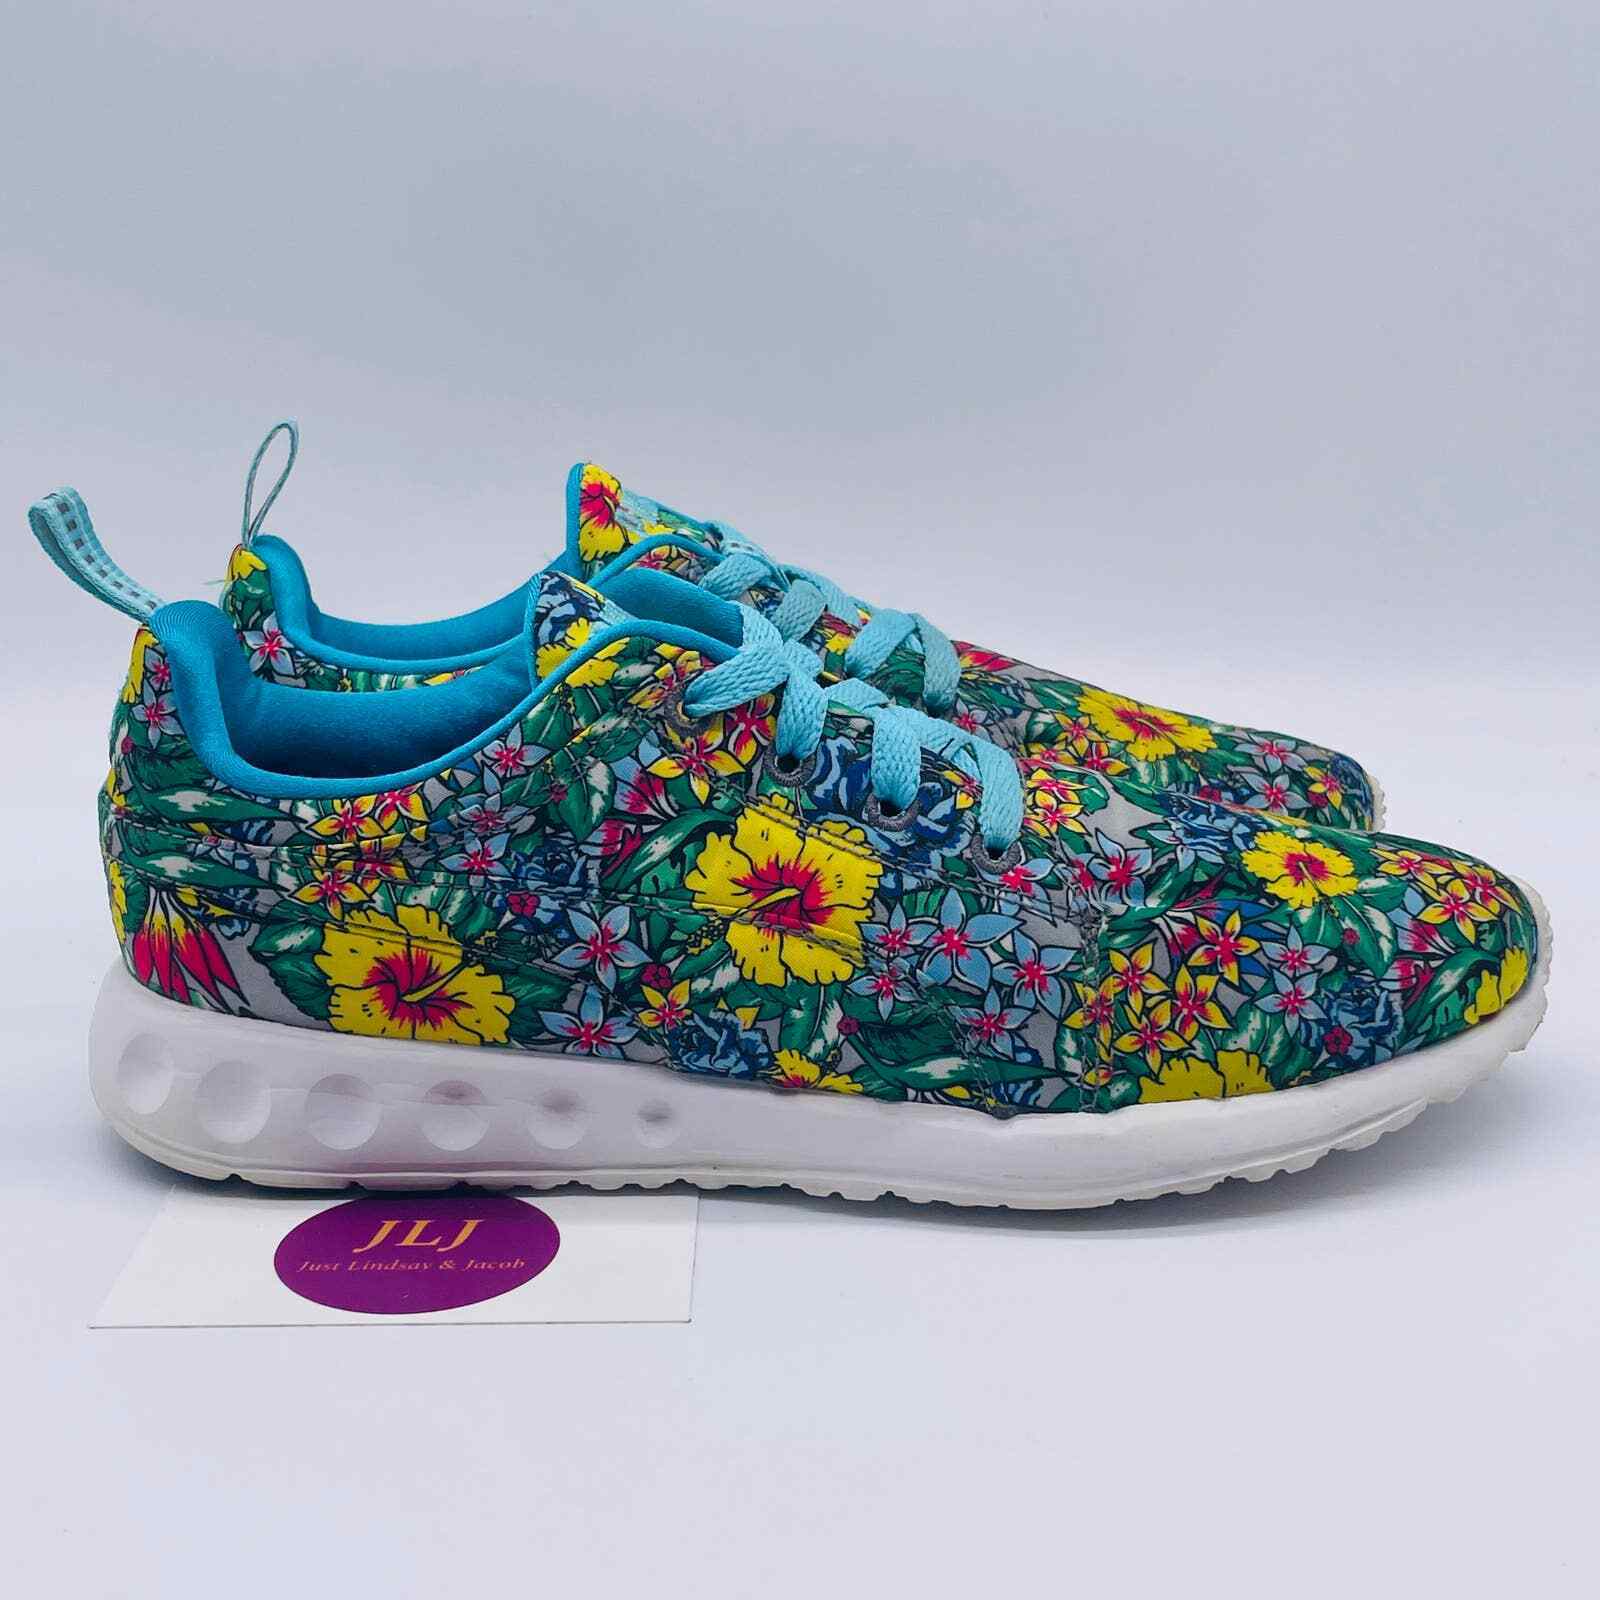 Puma Year-end annual account Womens Carson Runner Hibiscus Cash special price 188907-01 Size 7.5 Floral